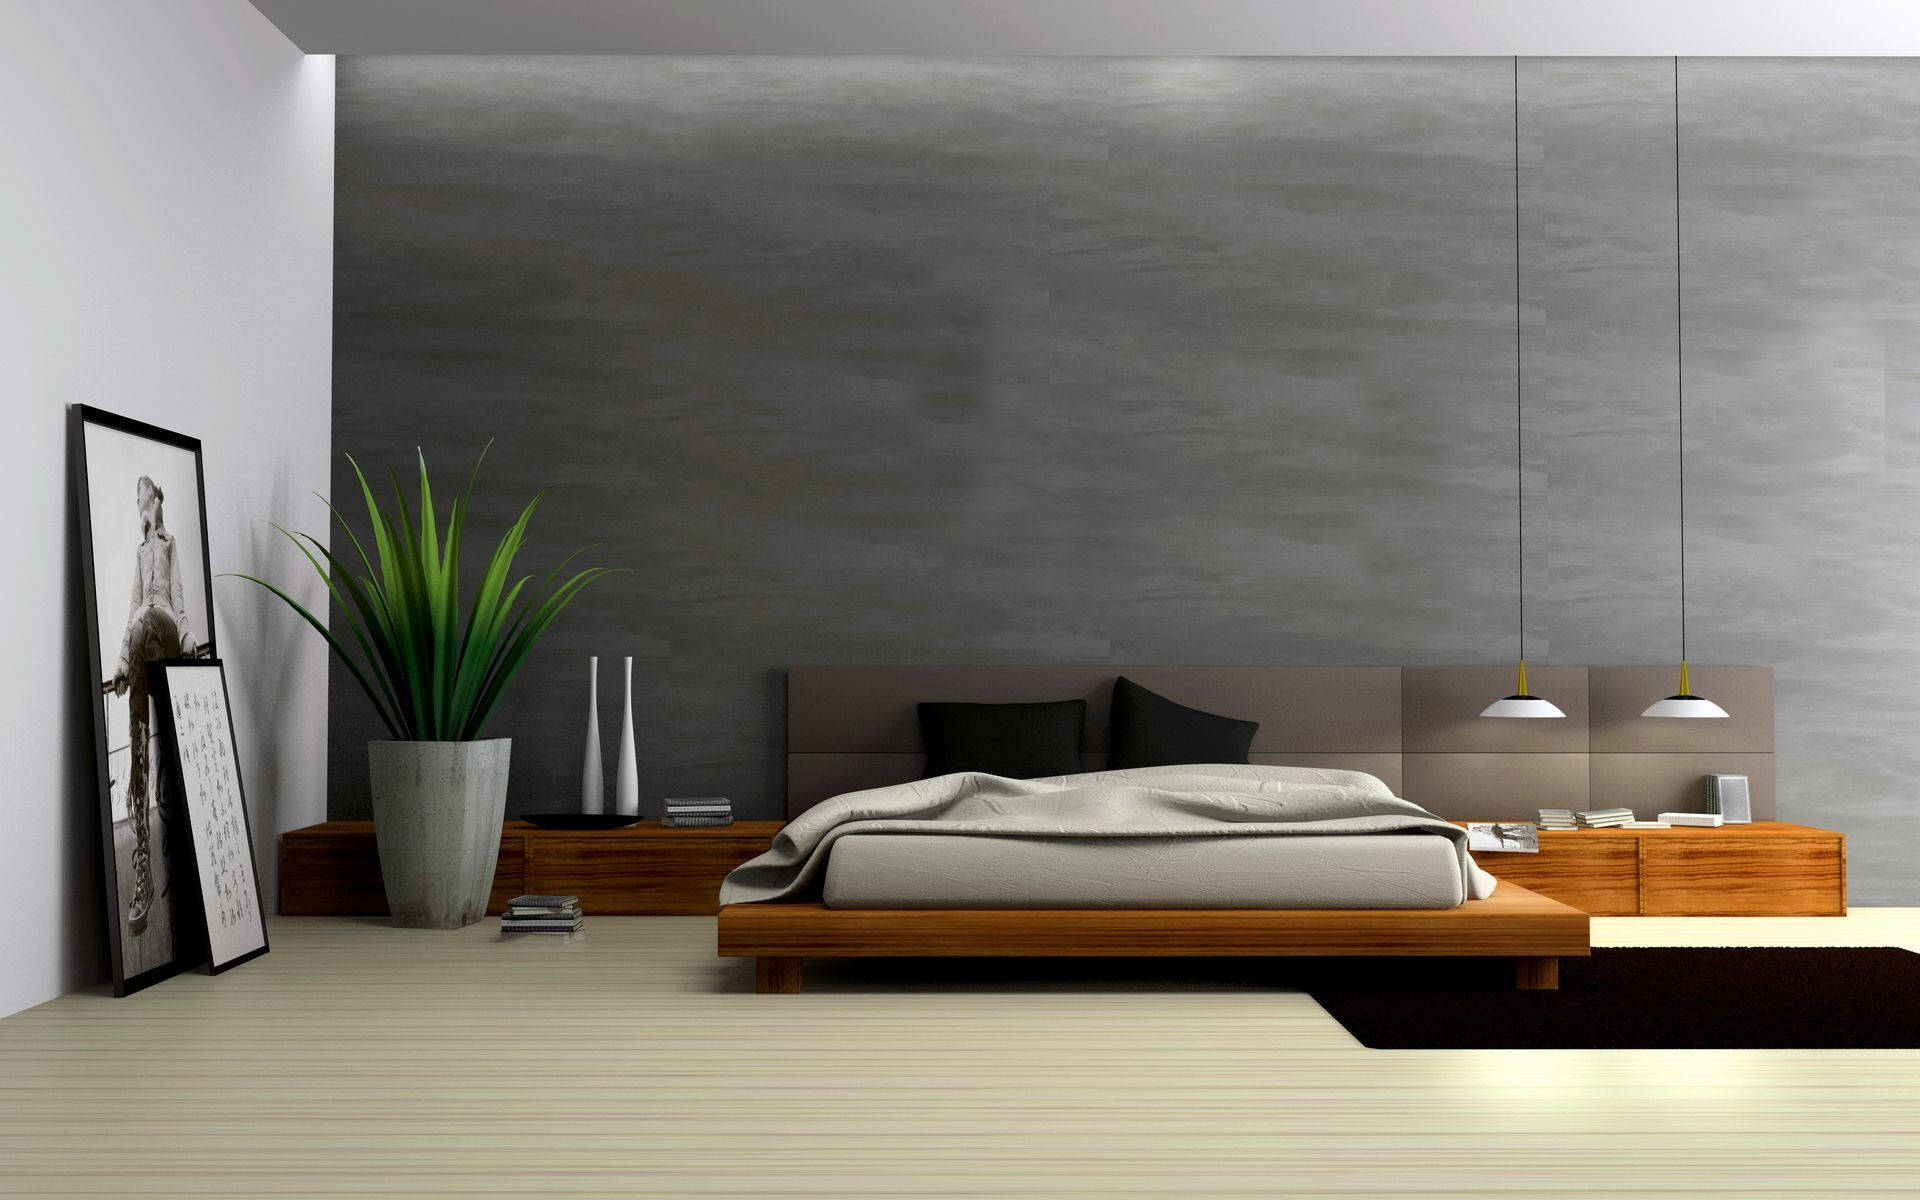 Perspective Design Of A Cozy Bedroom Background